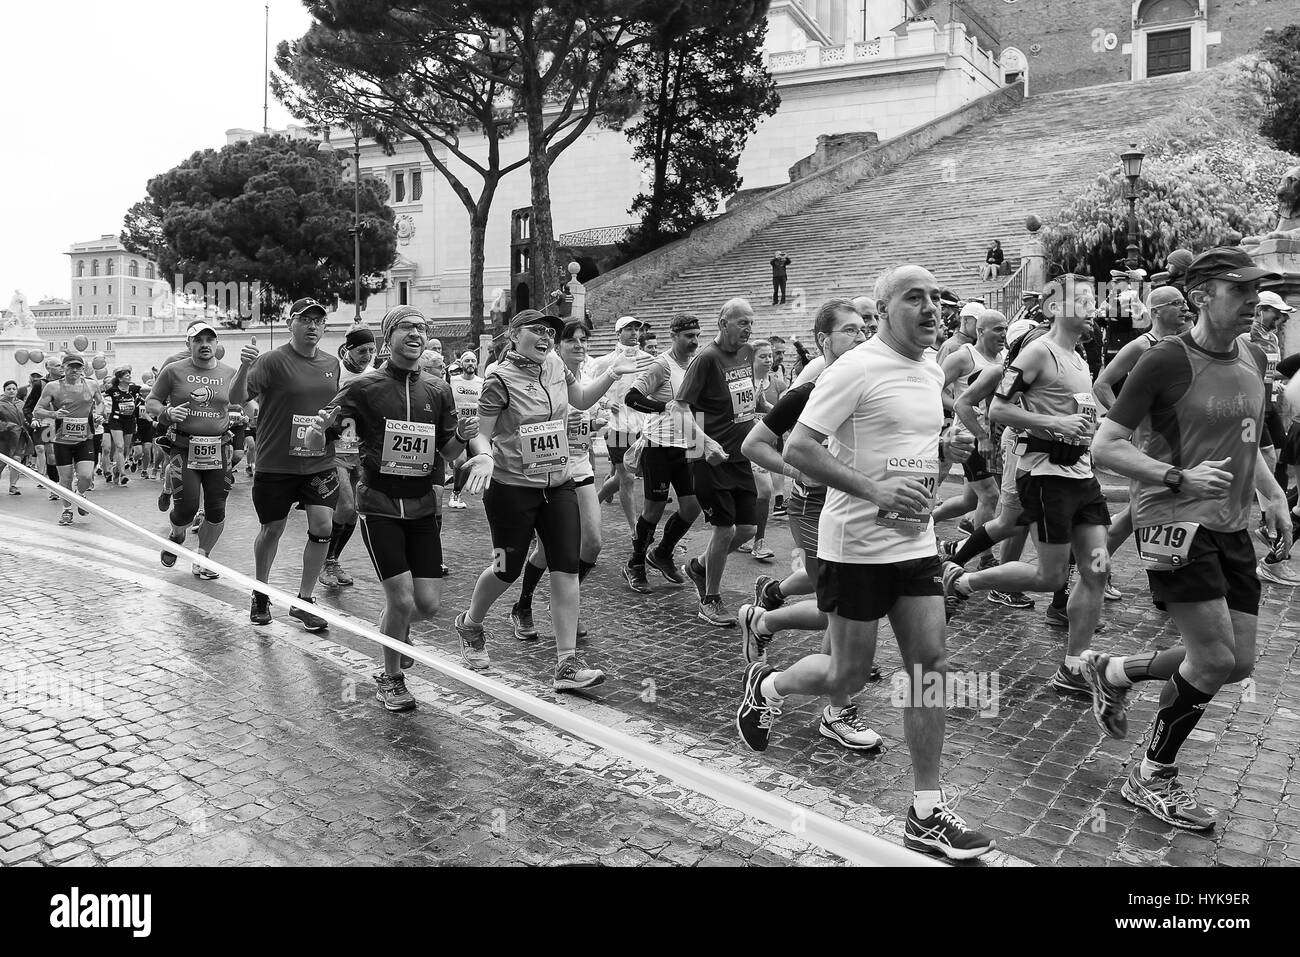 Rome, Italy - April 2, 2017: Athletes participating at the 23rd Rome marathon run through the street circuit passing the Capitol, seat of the Municipa Stock Photo